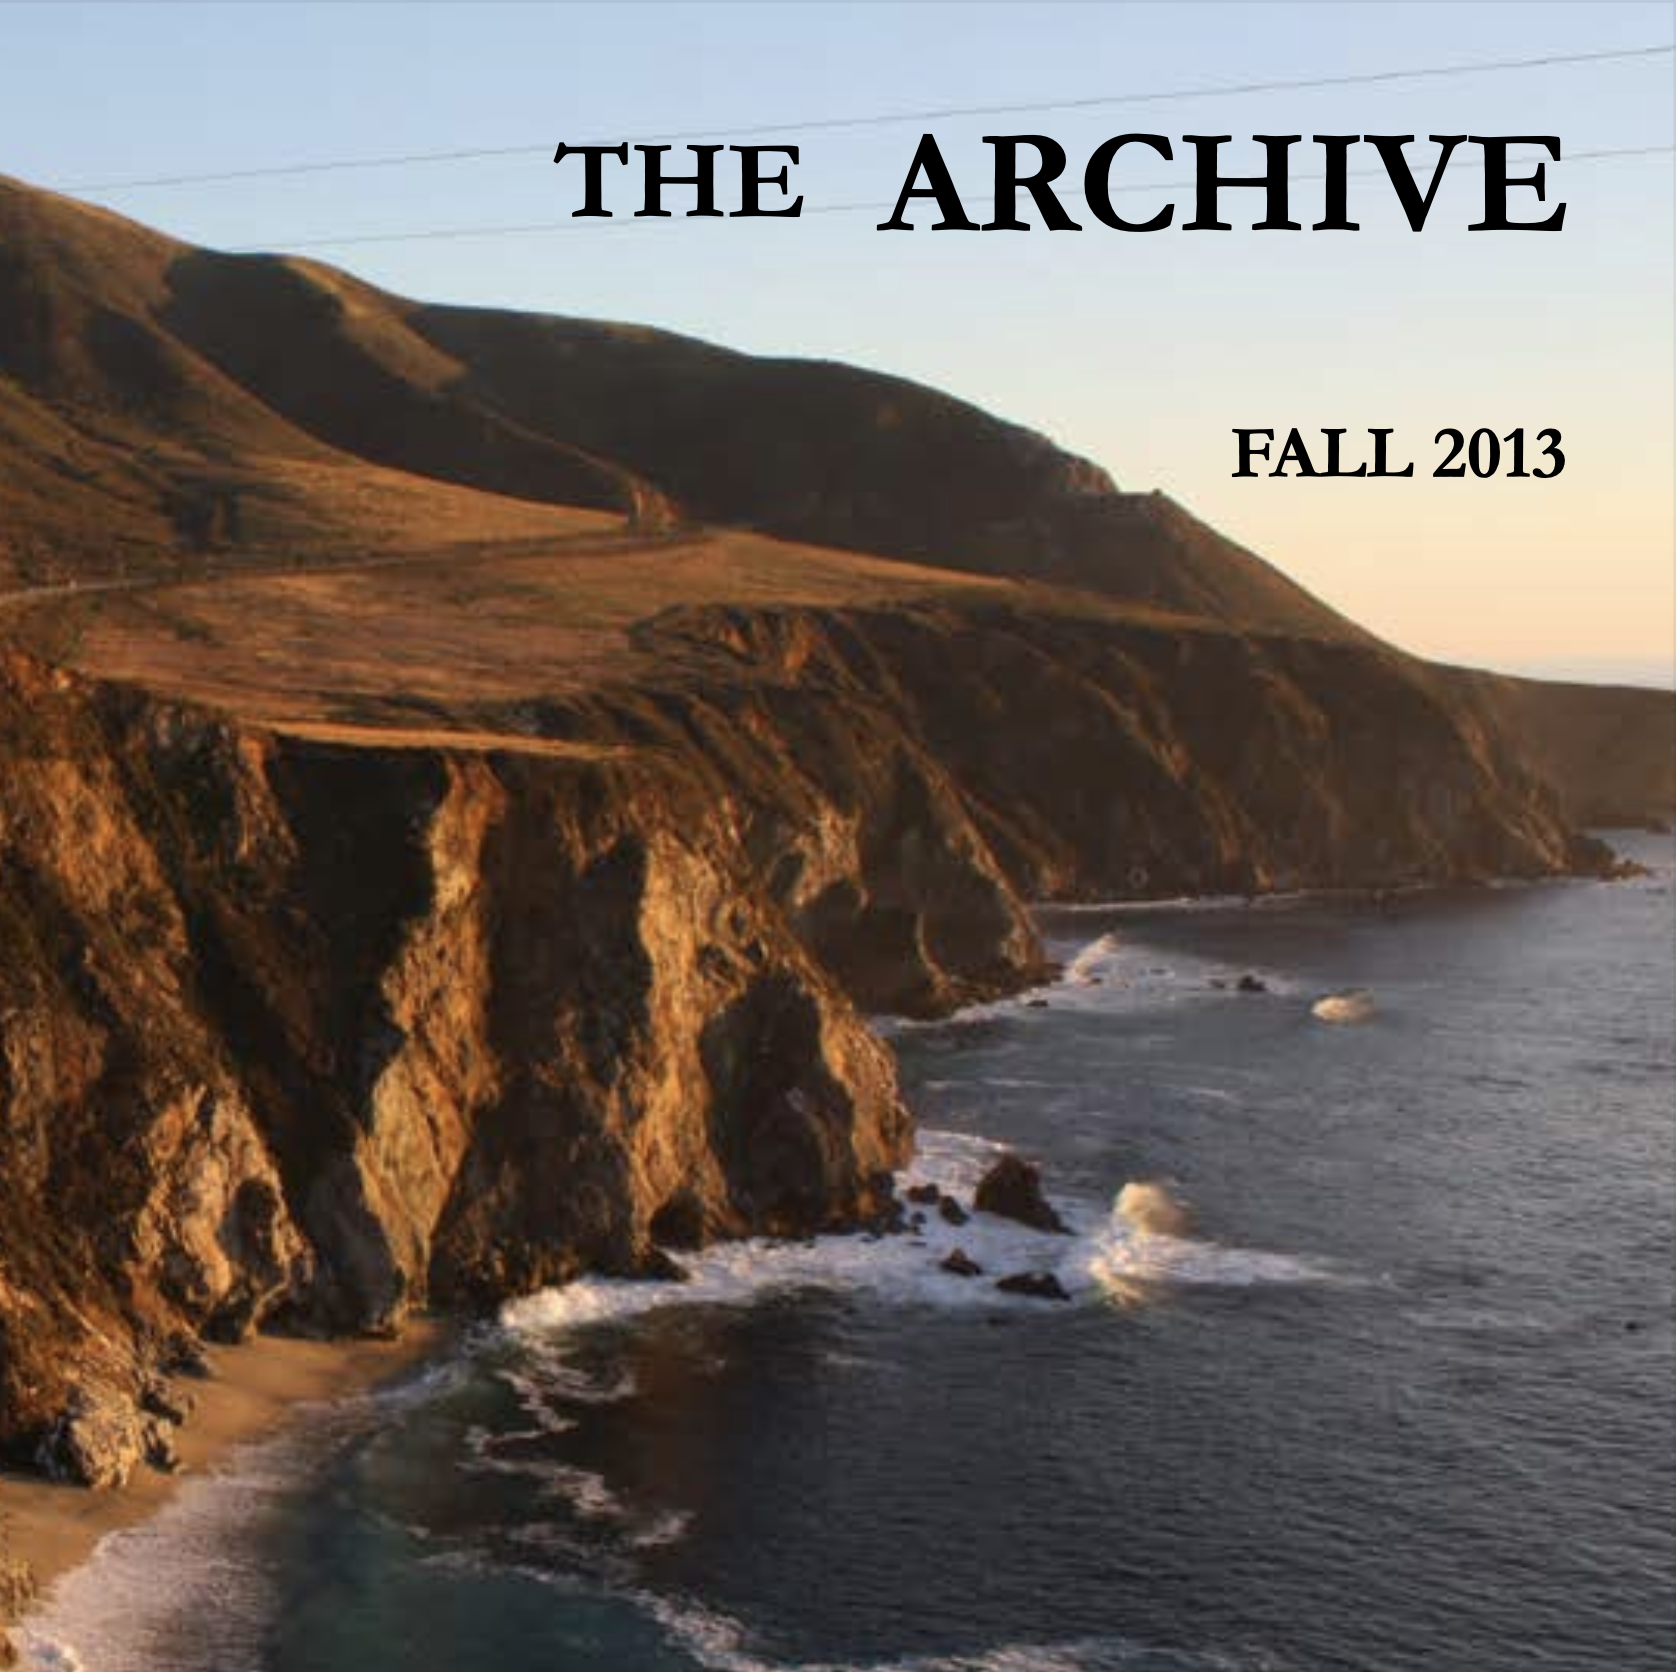 The Archive, Fall 2013